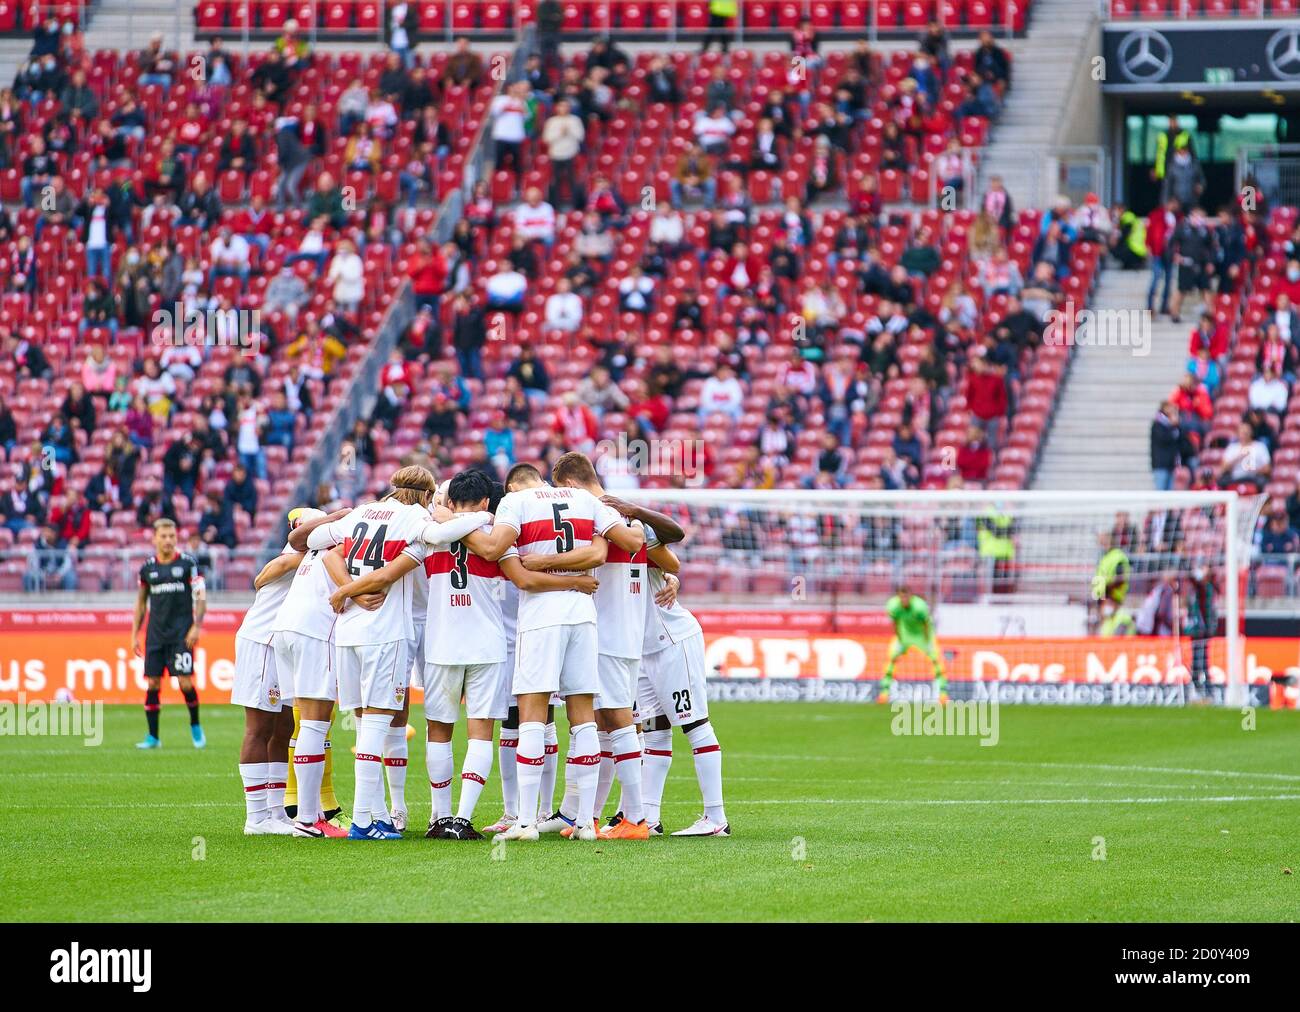 Football Stadium Of The Vfb Stuttgart High Resolution Stock Photography And Images Alamy